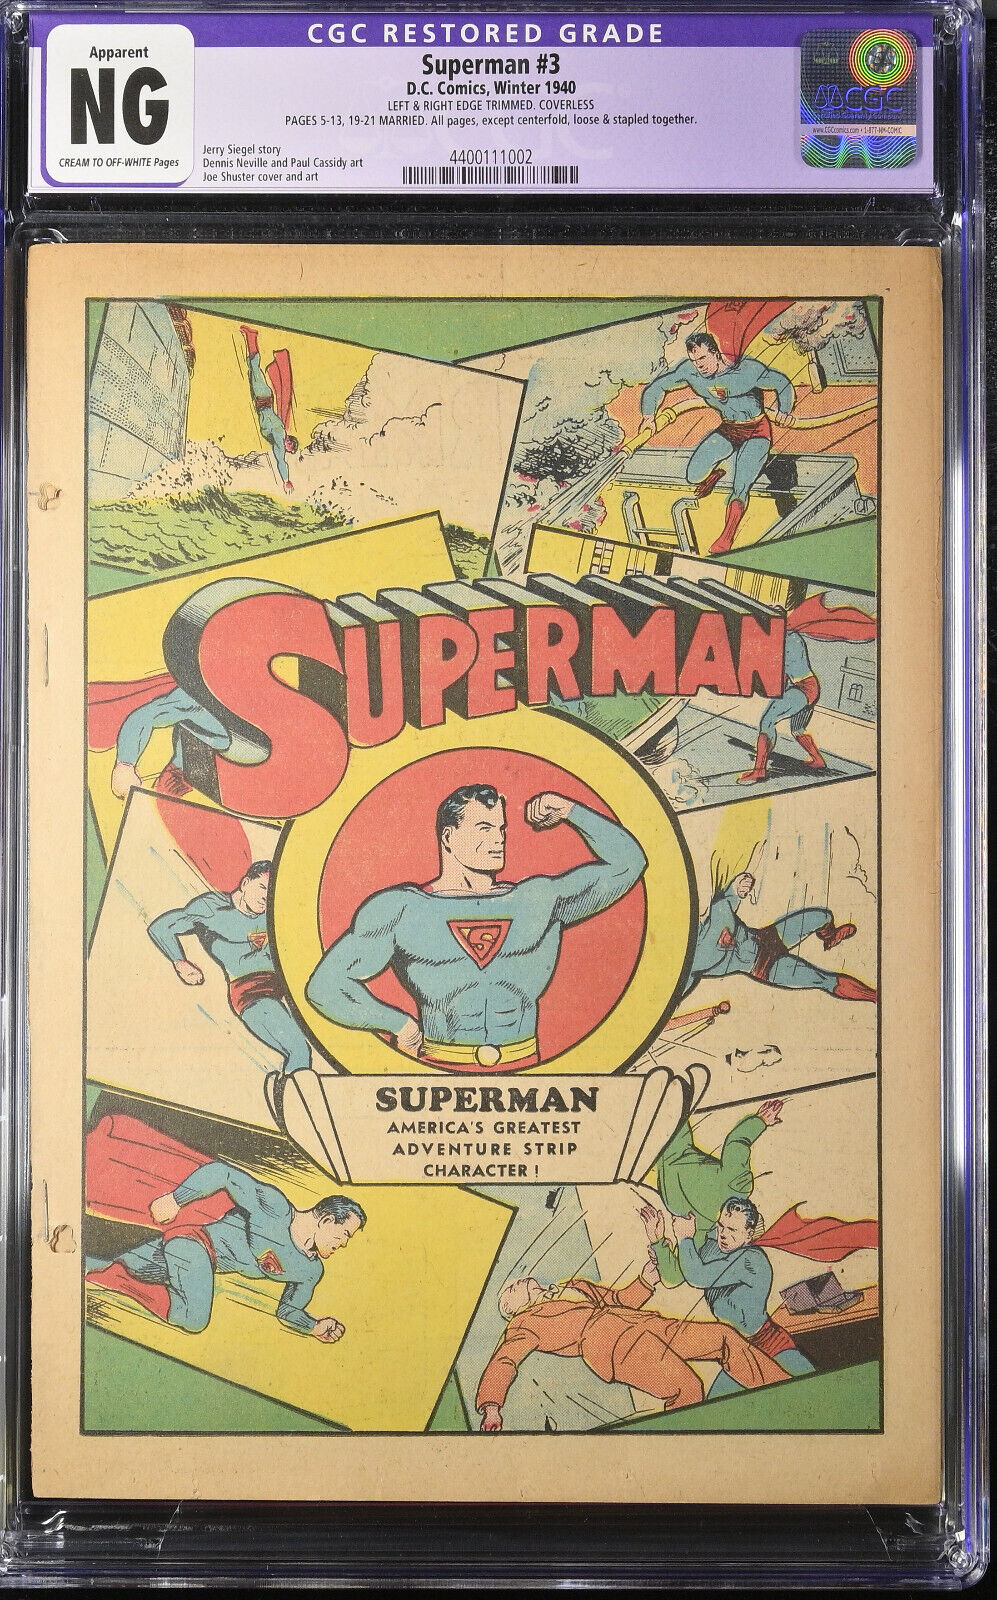 SUPERMAN #3 CGC NG (DC 1940) Complete interior coverless please read